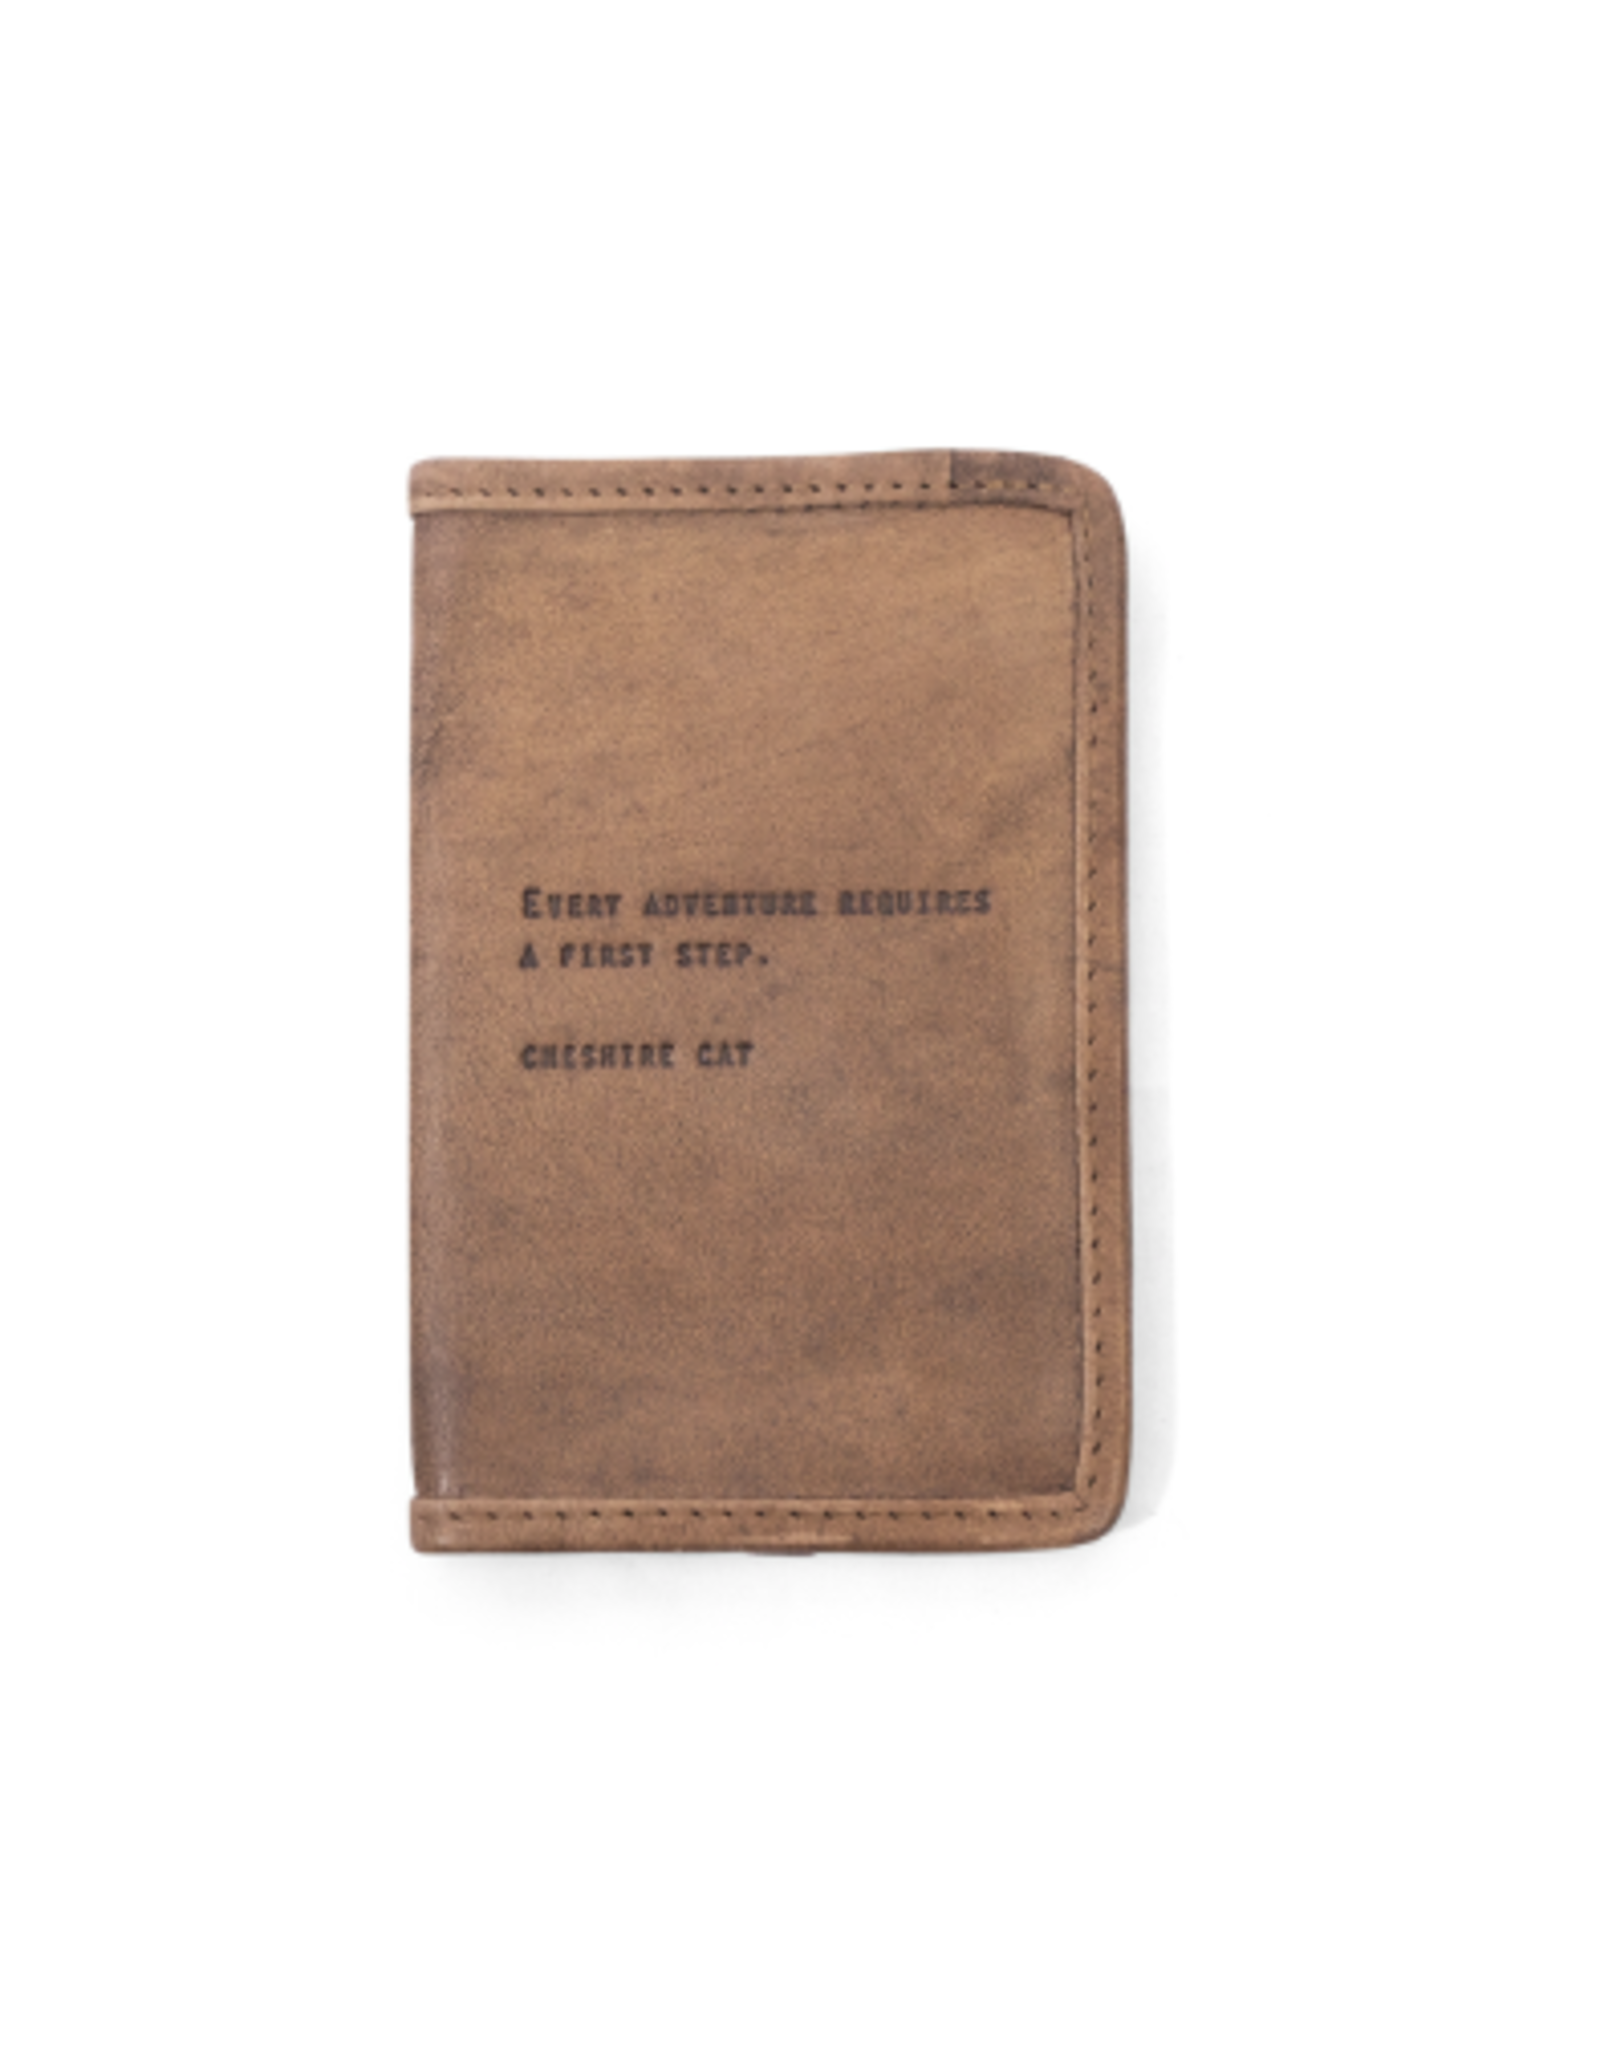 Sugarboo & Co Leather Passport Cover, Cheshire Cat